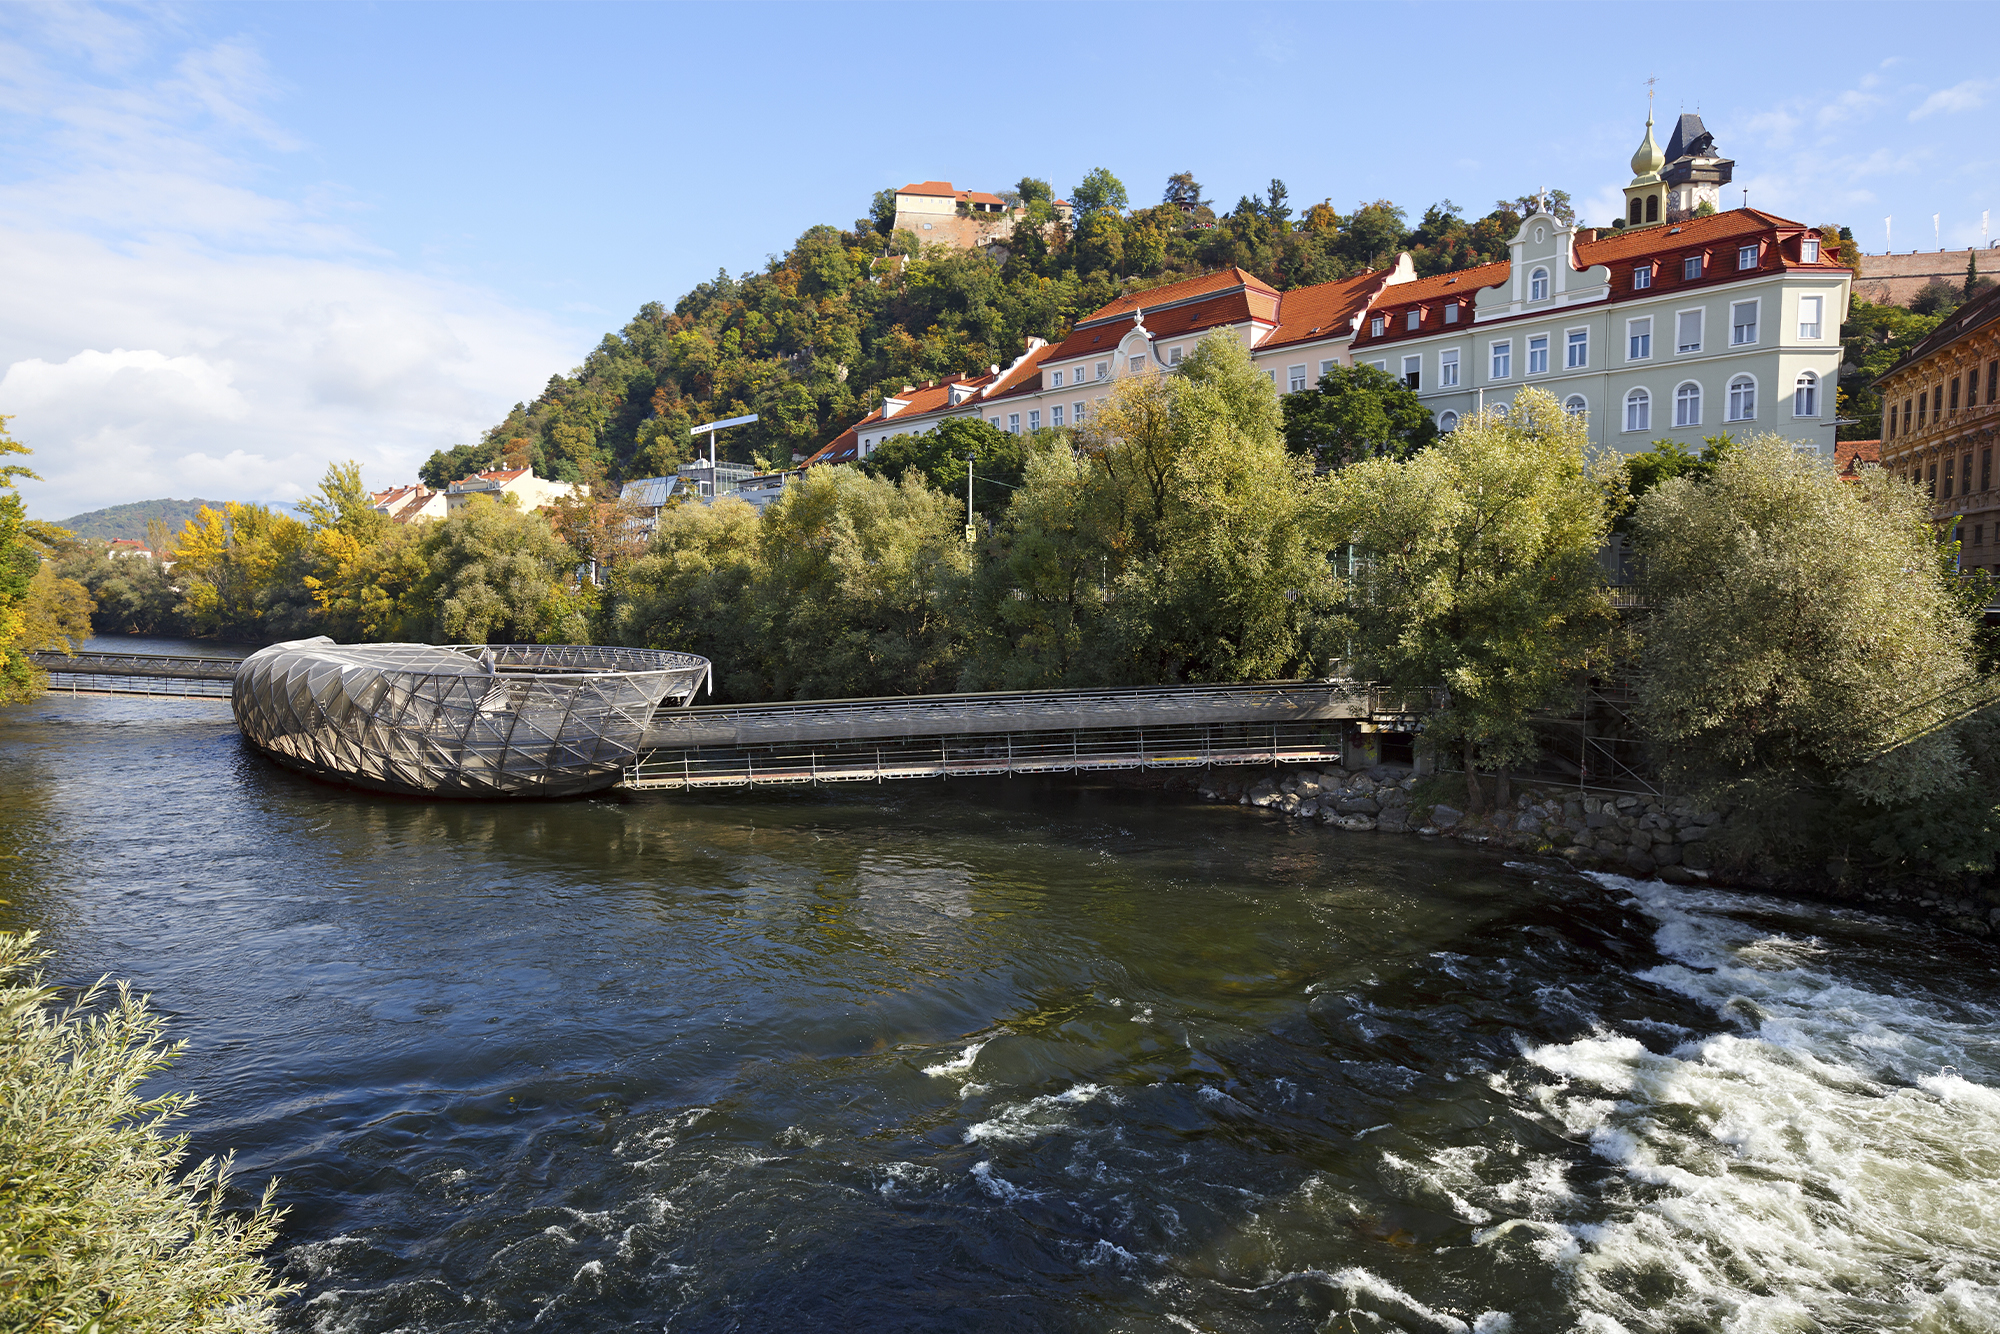 River Mur with the artificial floating platform Mur island (Murinsel) in the middle and old buildings on the river bank Graz Austria